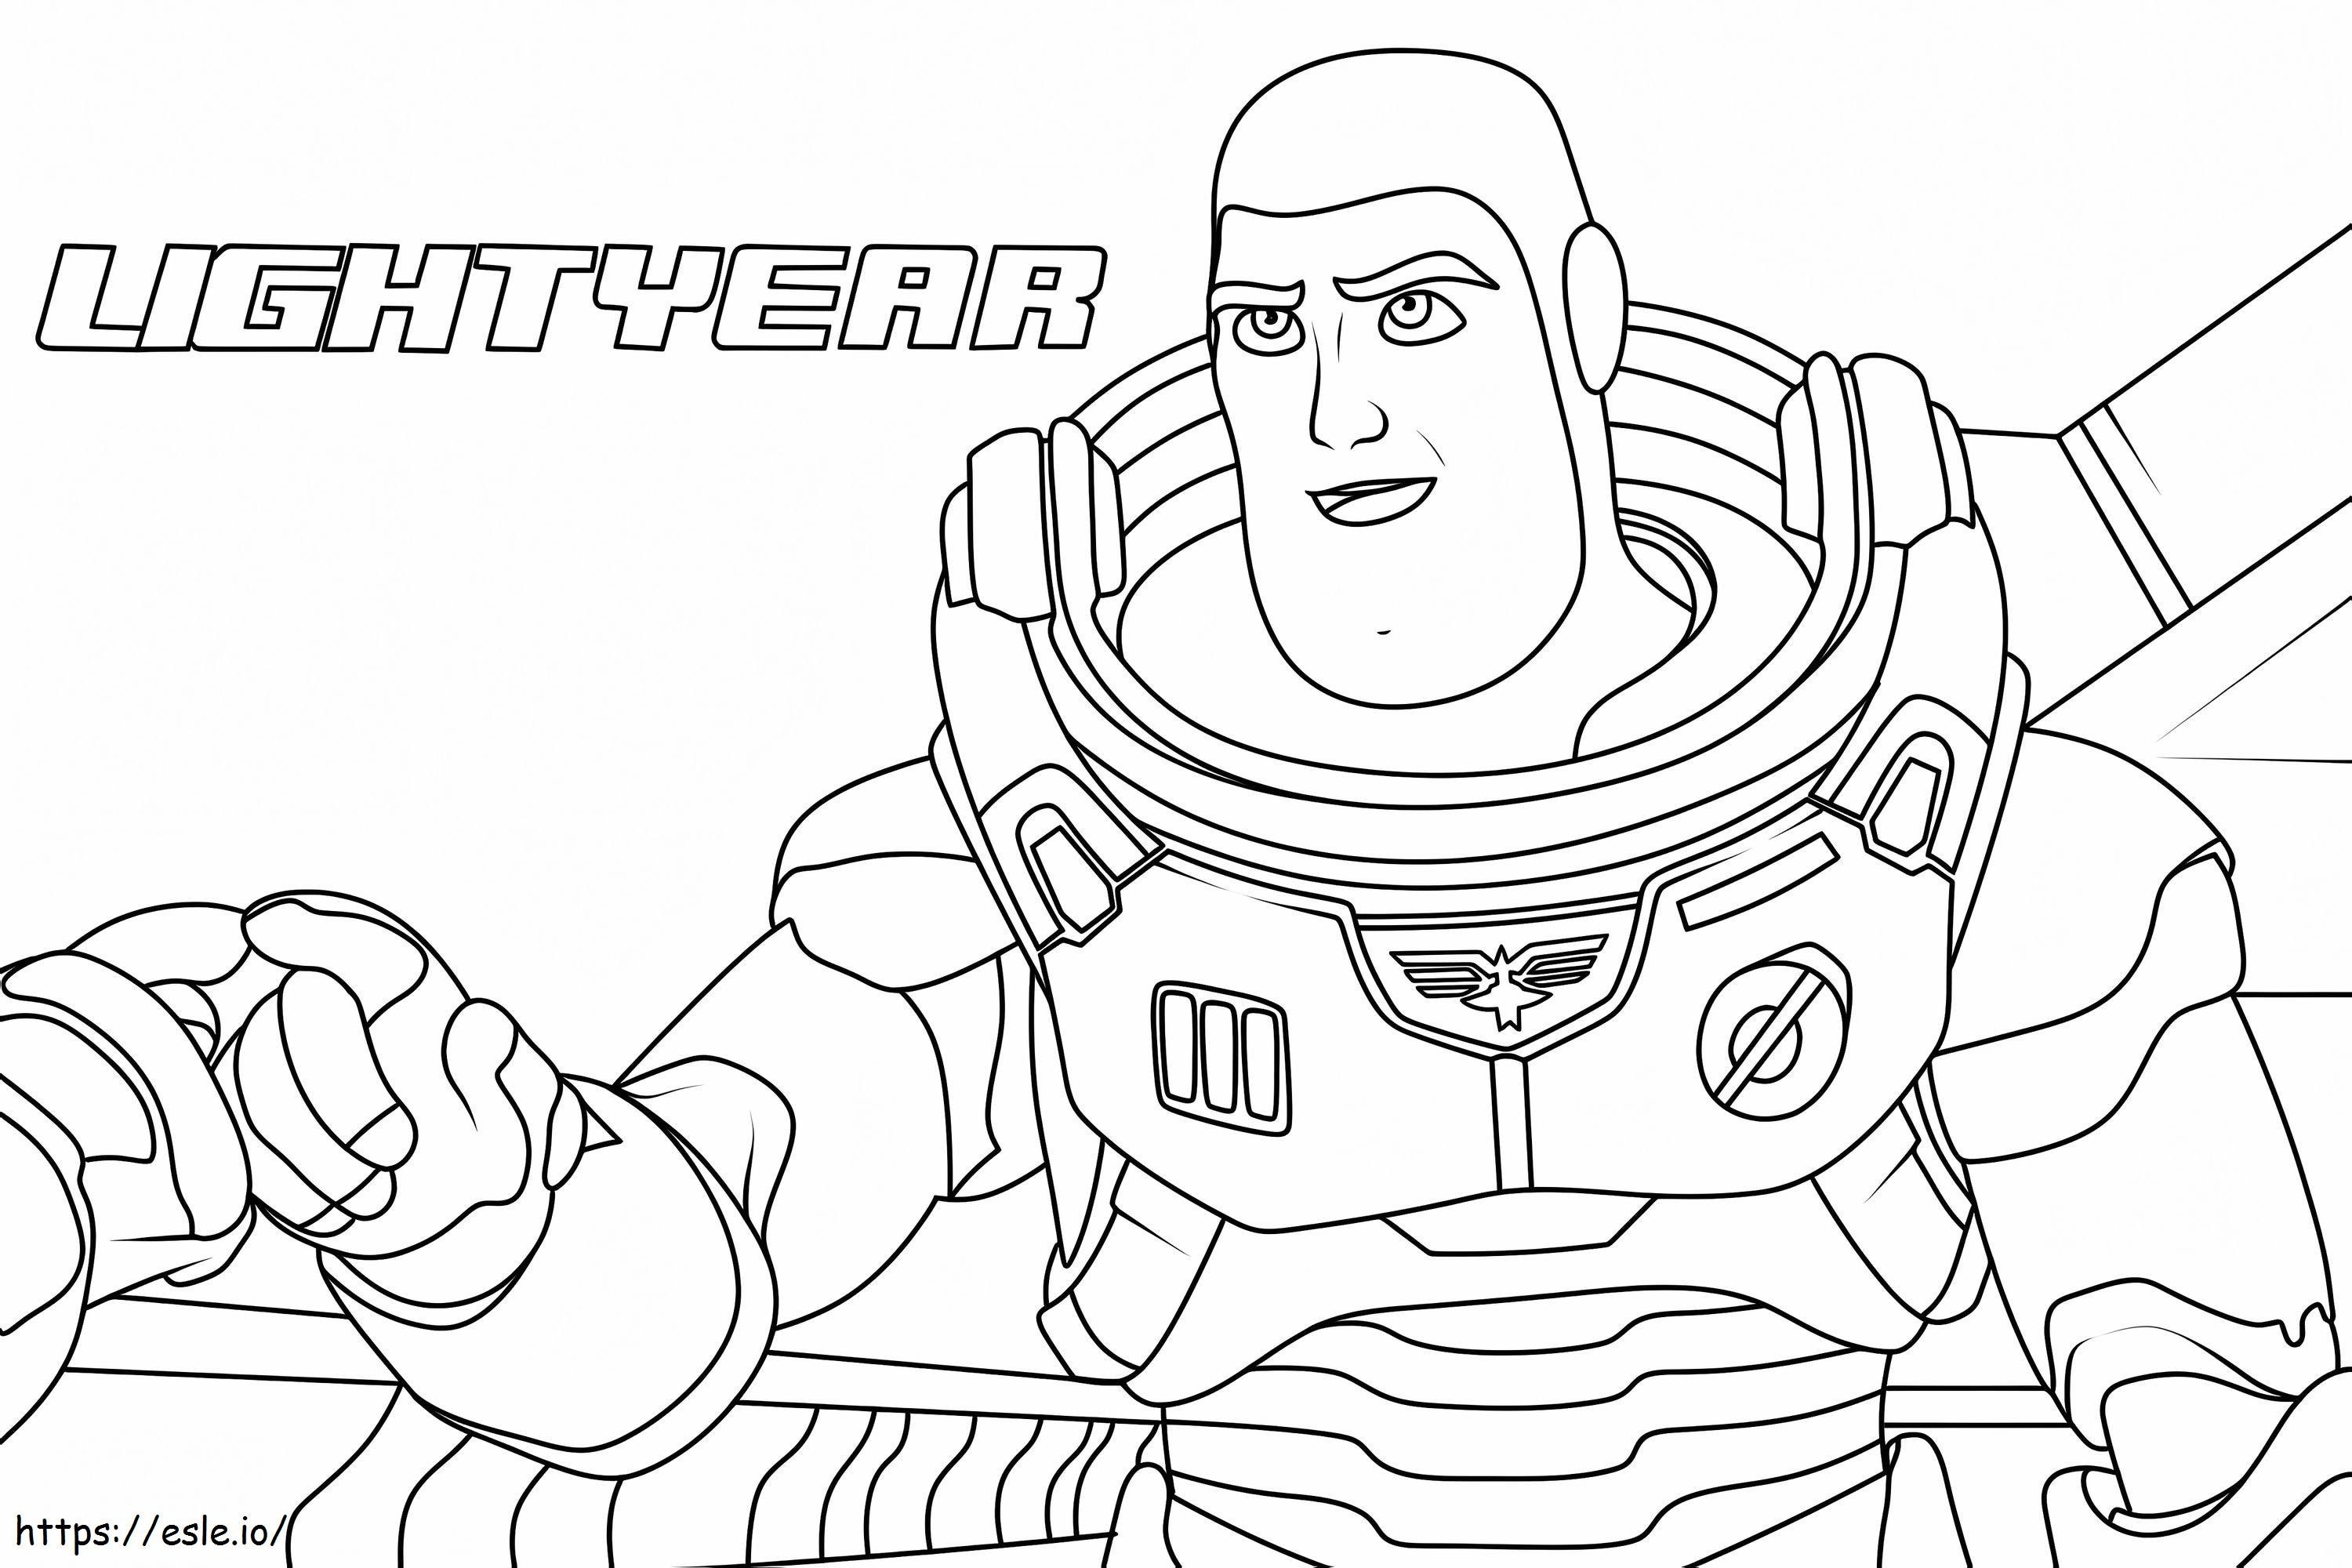 Disney Lightyear coloring page